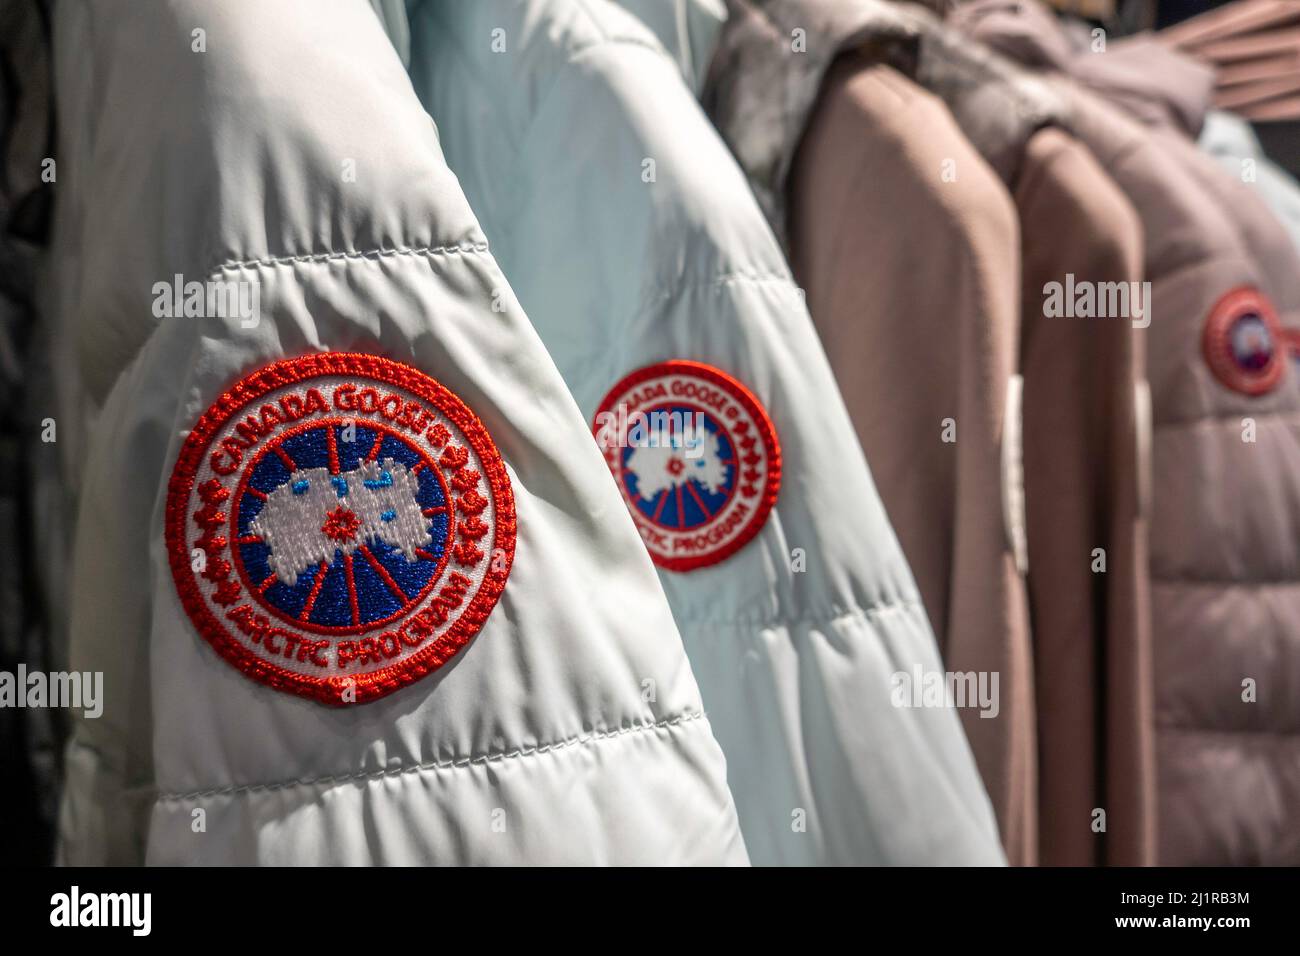 Canada Goose New York is located at 689 Fifth Avenue in Midtown Manhattan, NYC, USA Stock Photo